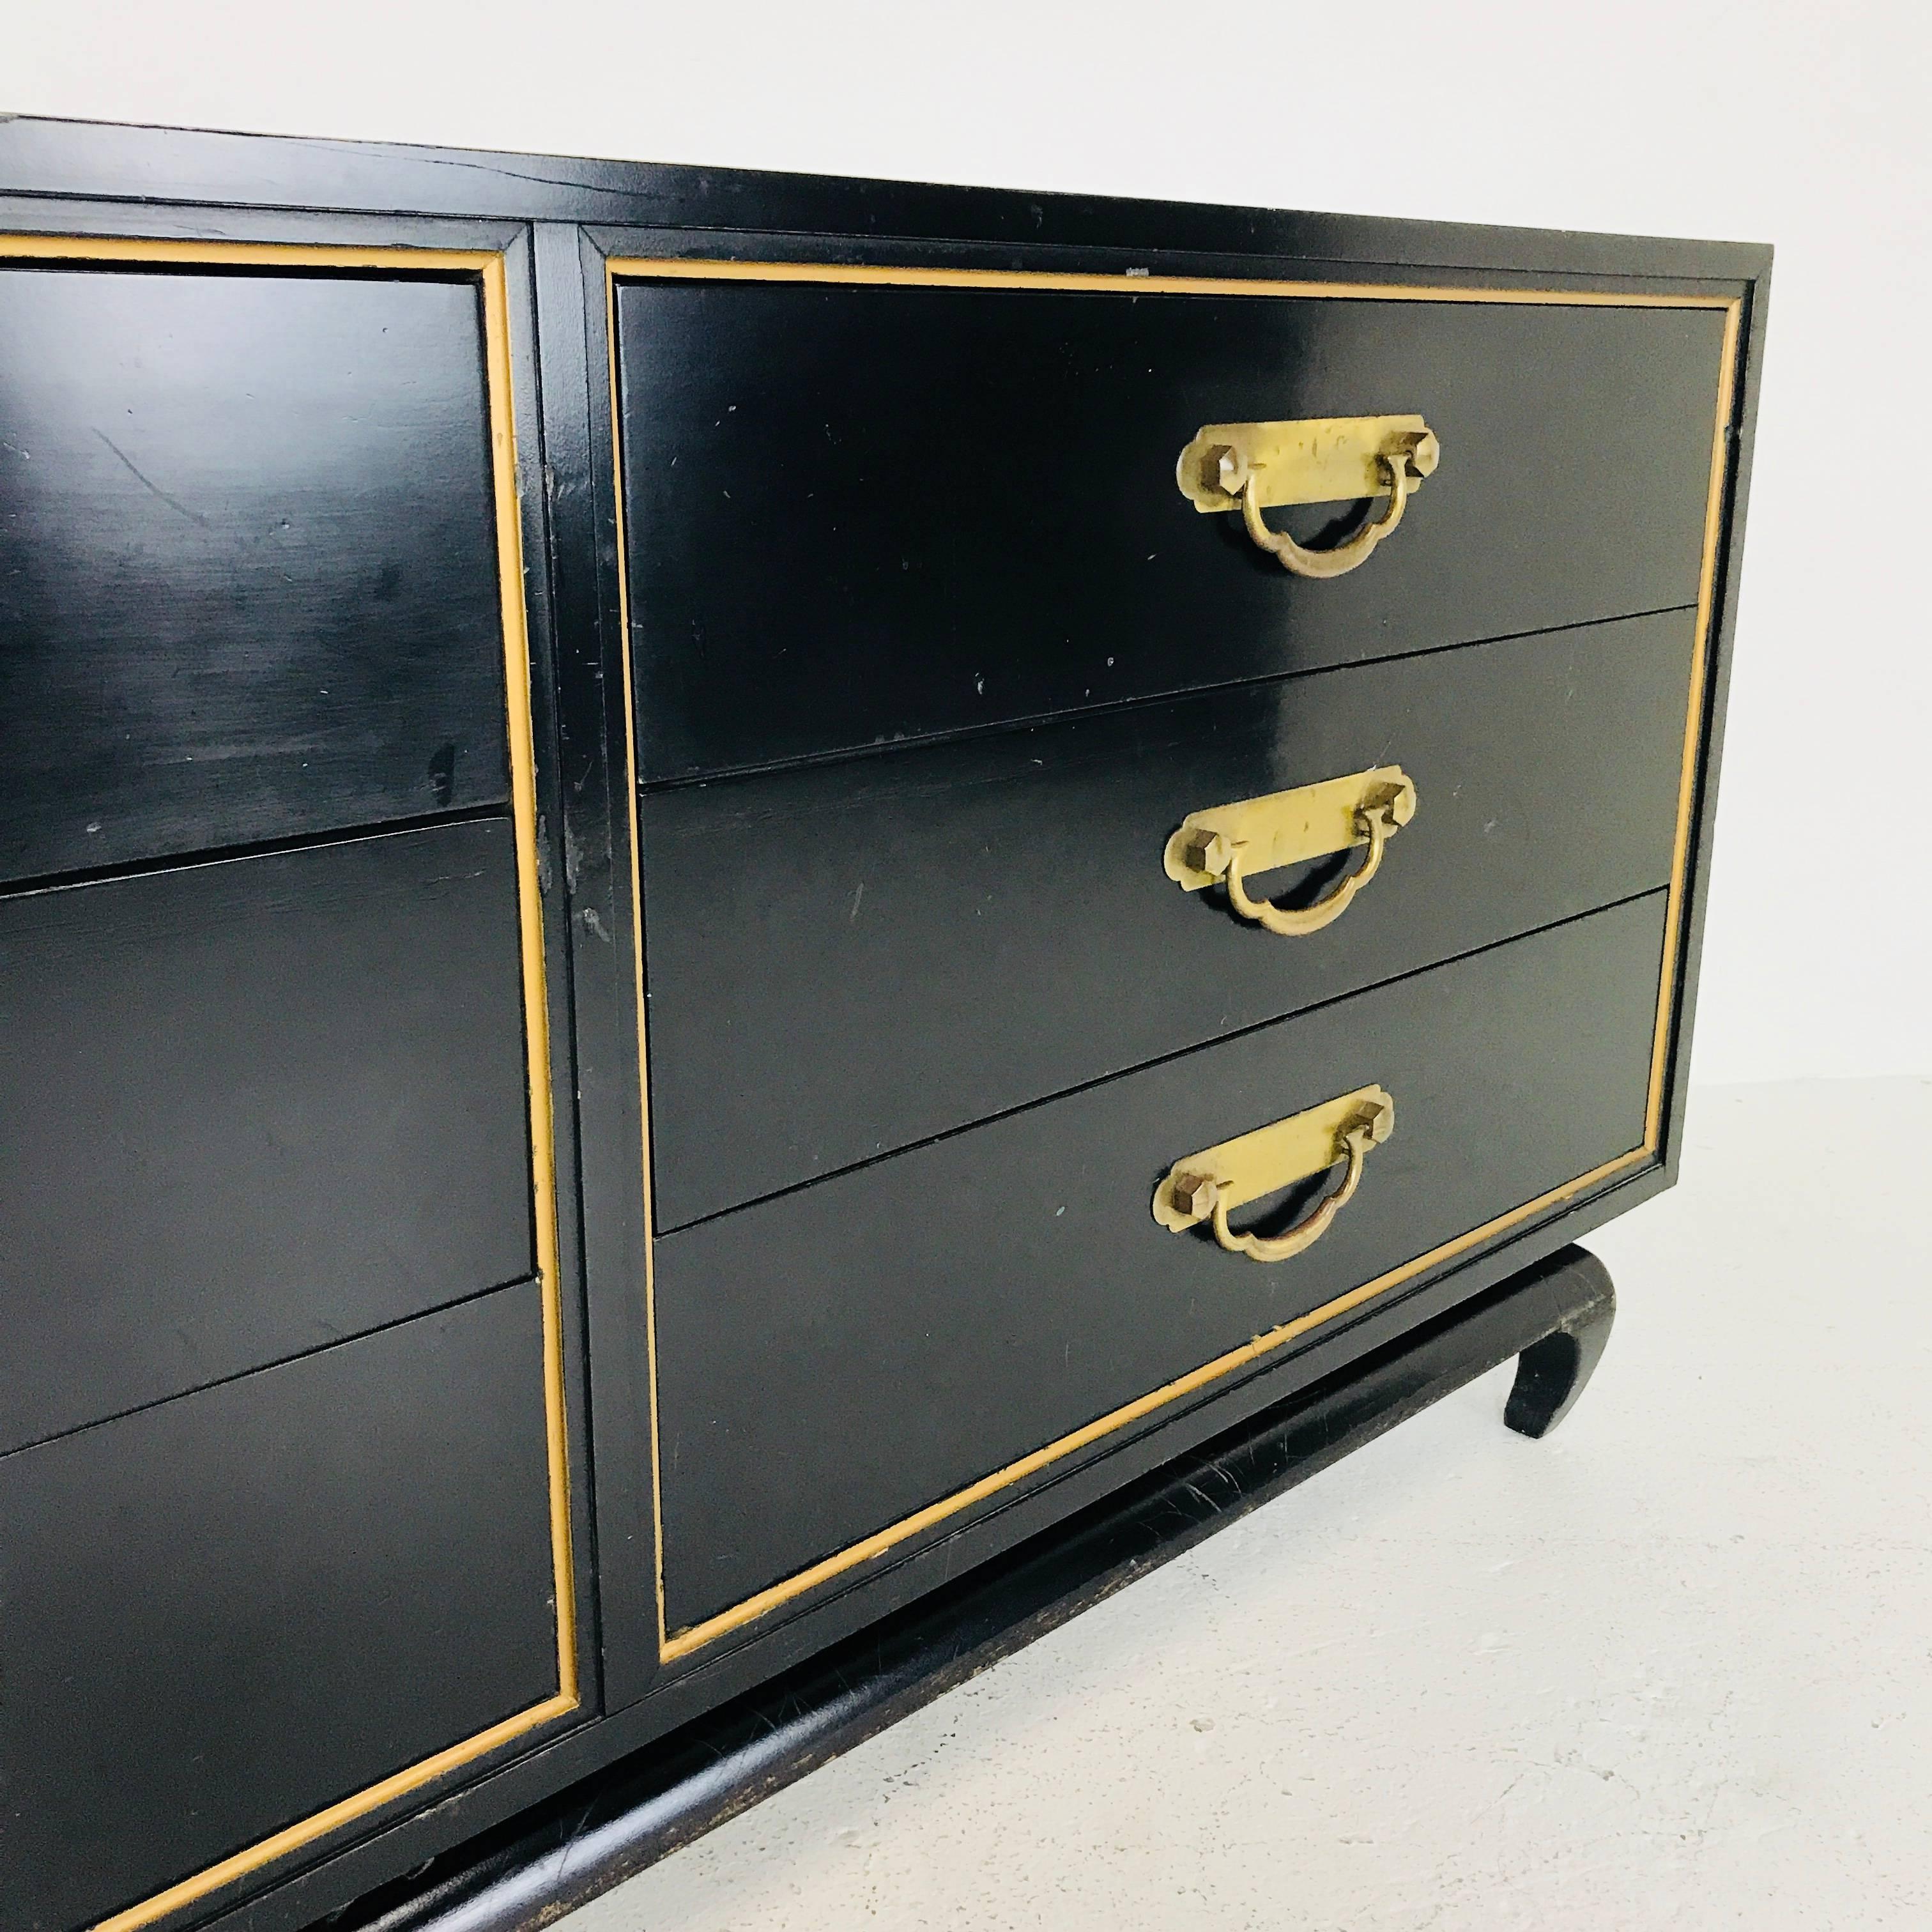 Black and gold Asian dresser by American of Martinsville. Dresser need refinishing but in overall good vintage condition.

Dimensions:
68